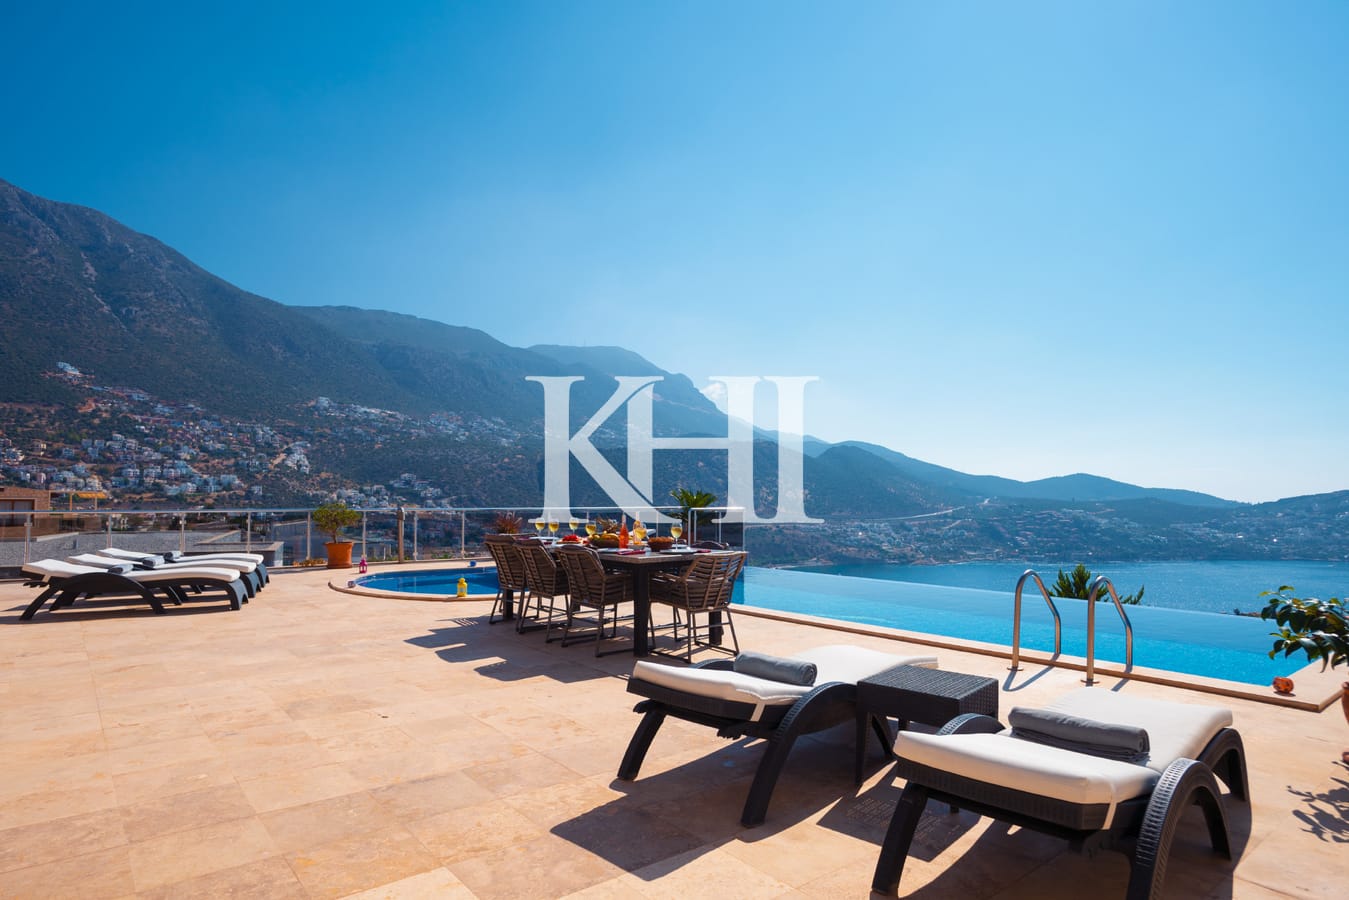 Detached Villa For Sale With Panoramic Kalkan View Slide Image 19